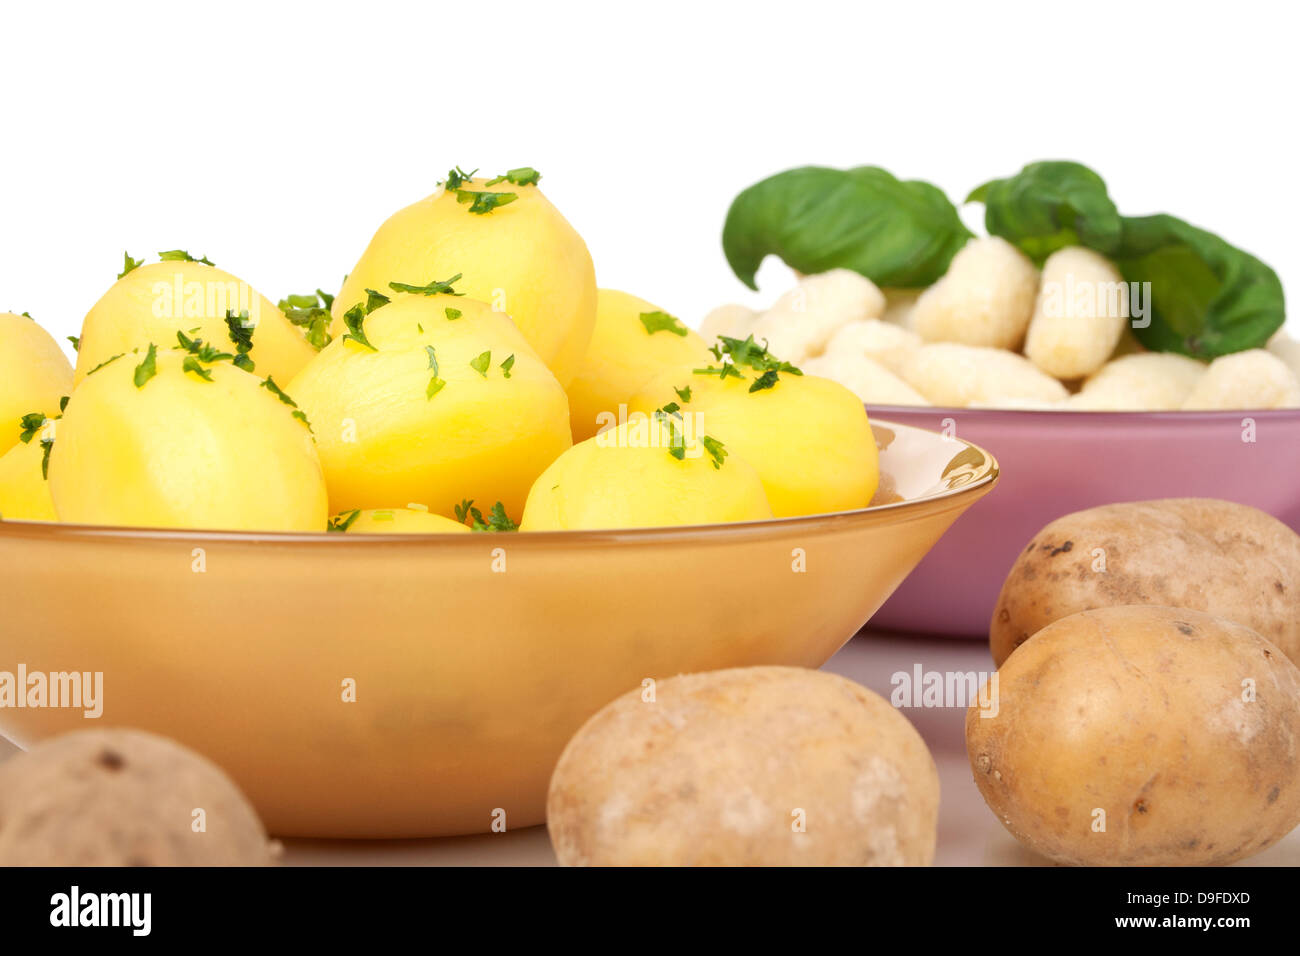 Cooked potatoes and Gnocchis Boiled potatoes and gnocchi Stock Photo